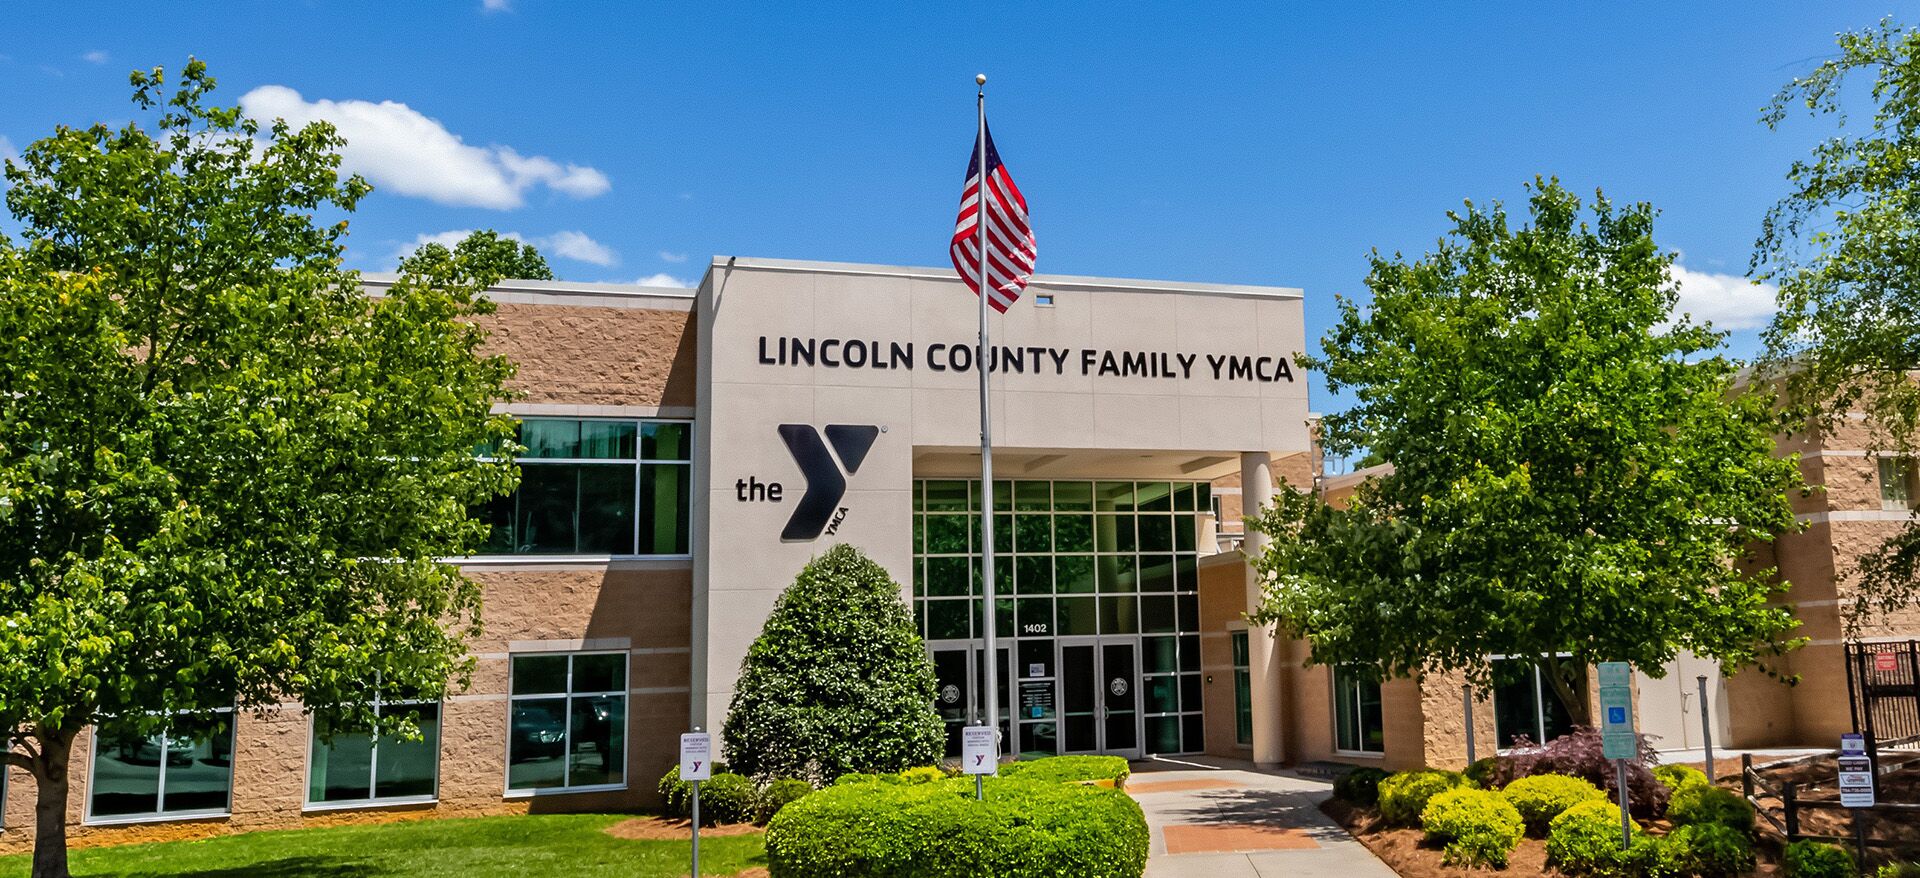 Come to Lincoln County YMCA, be impressed and become a member to transform yourself